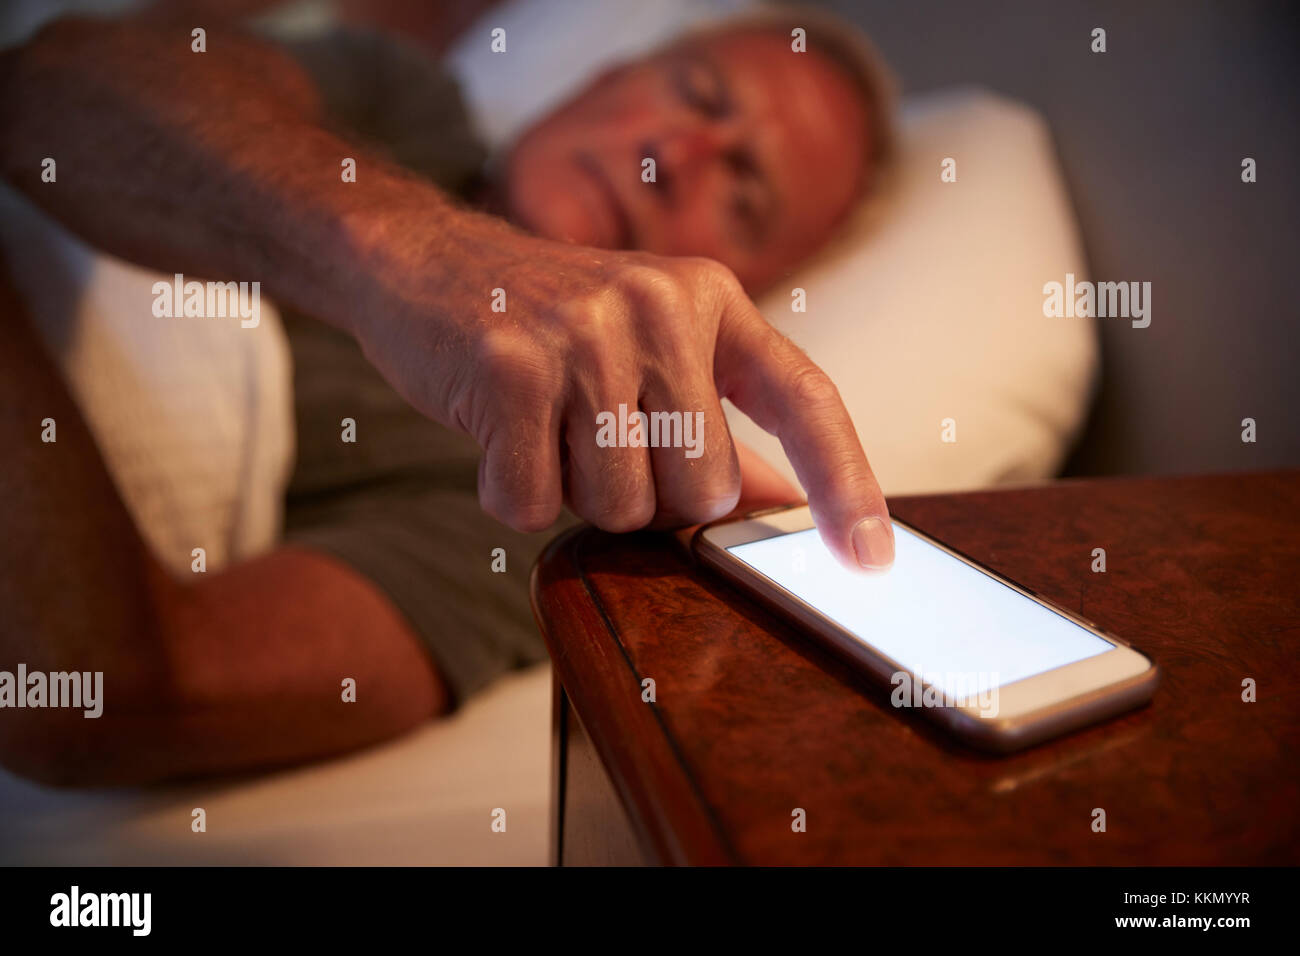 Sleepless Senior Man In Bed At Night Checking Mobile Phone Stock Photo